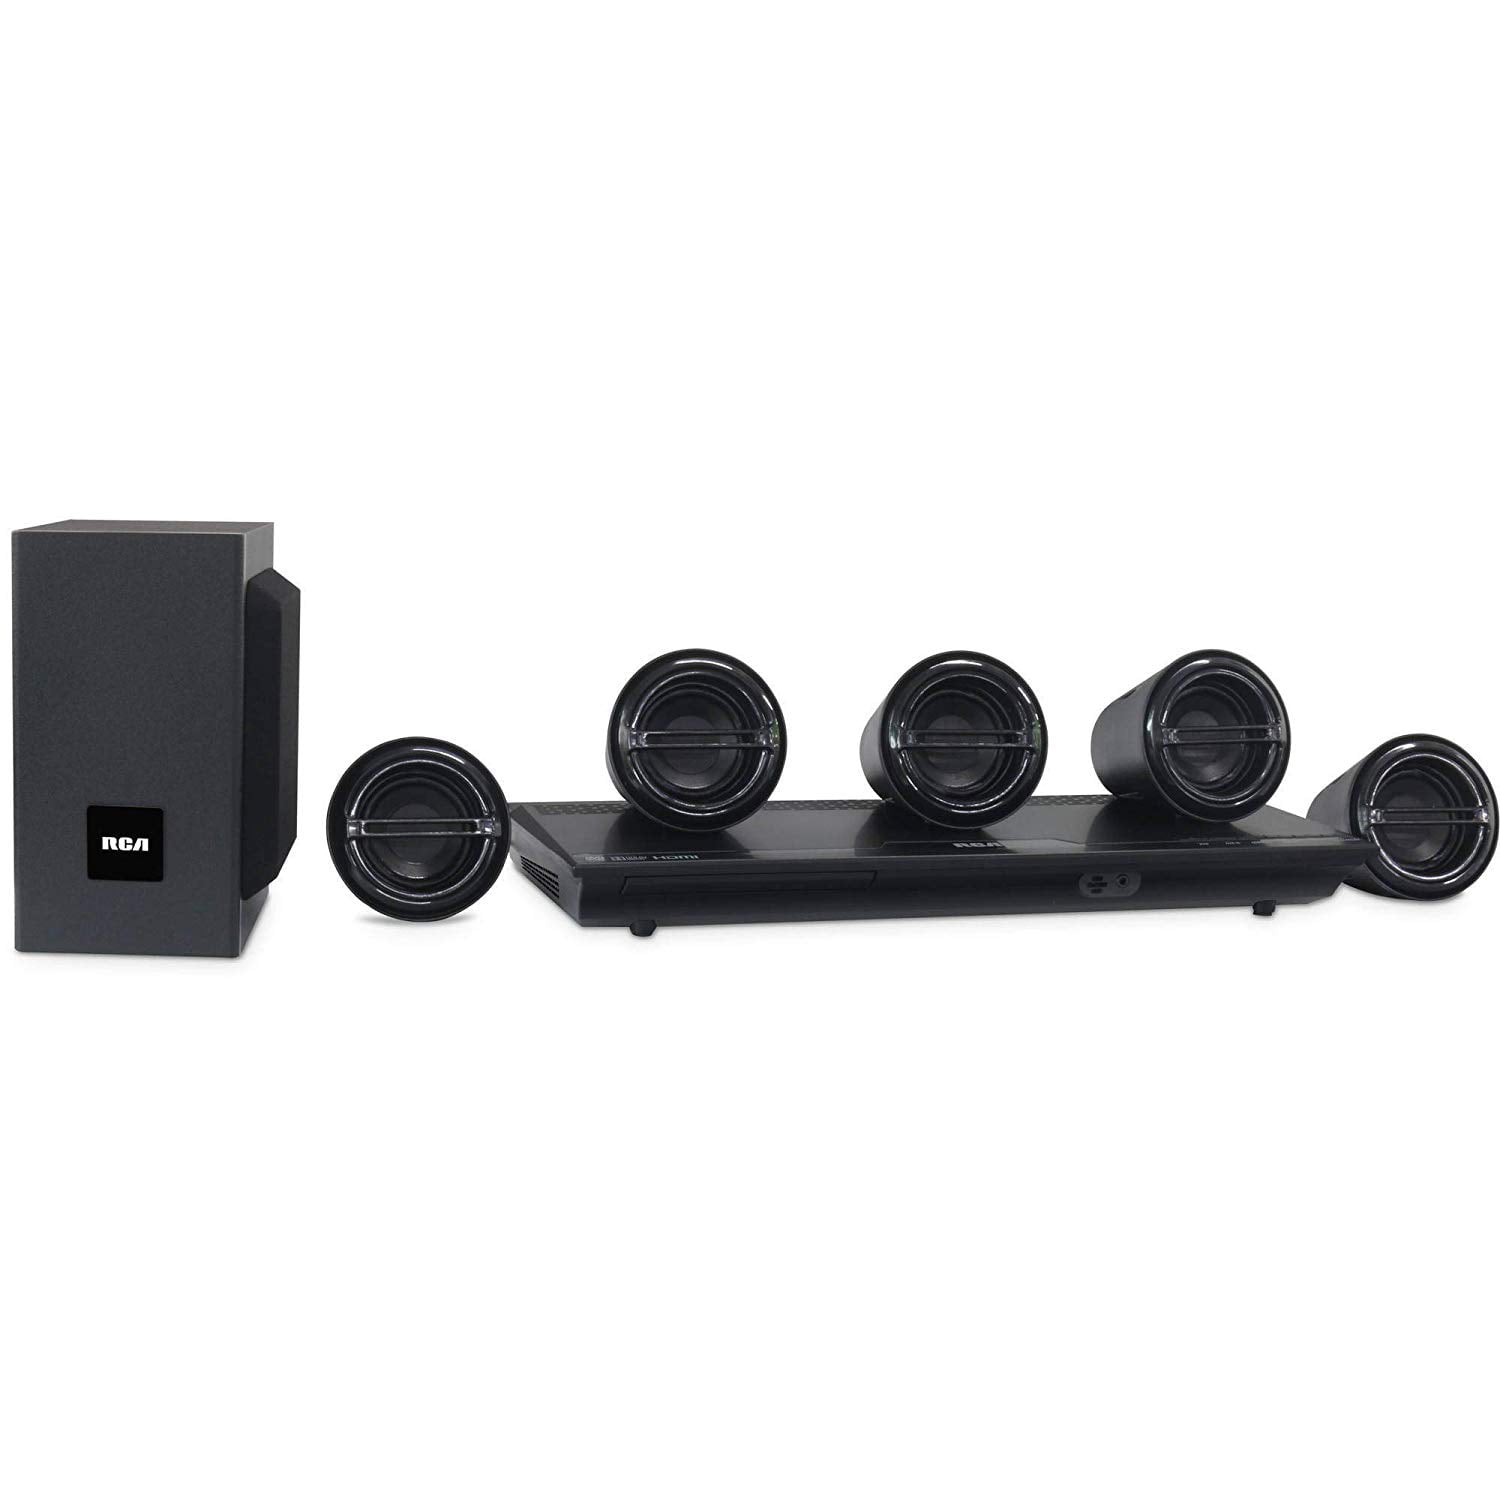 Rca DVD Home Theater System Hdmi 1080p Output 300 W 5.1